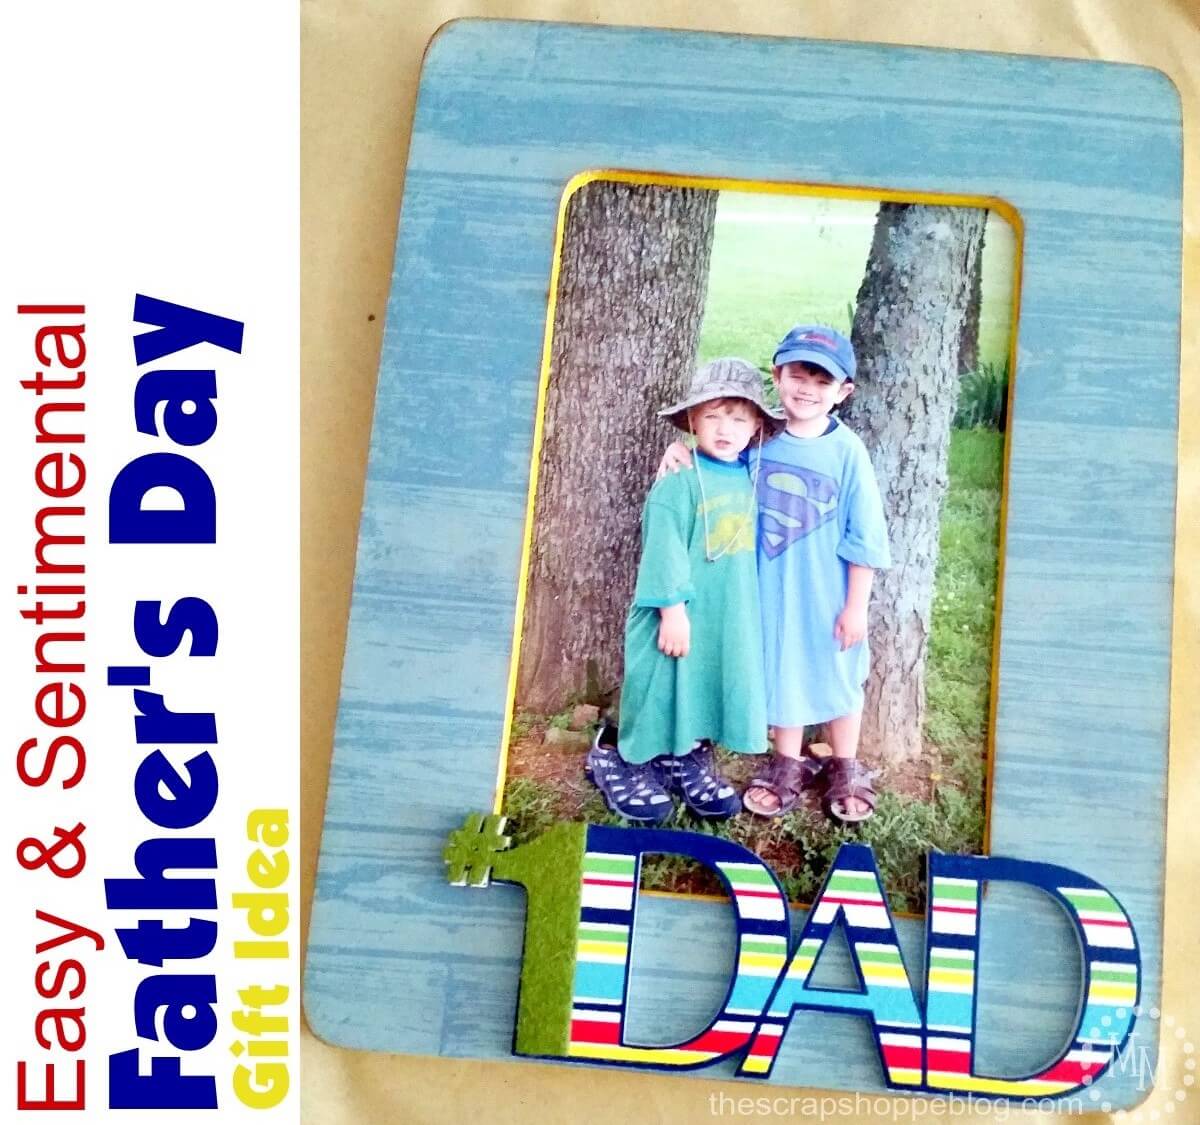 father's day gift ideas, father's day crafts